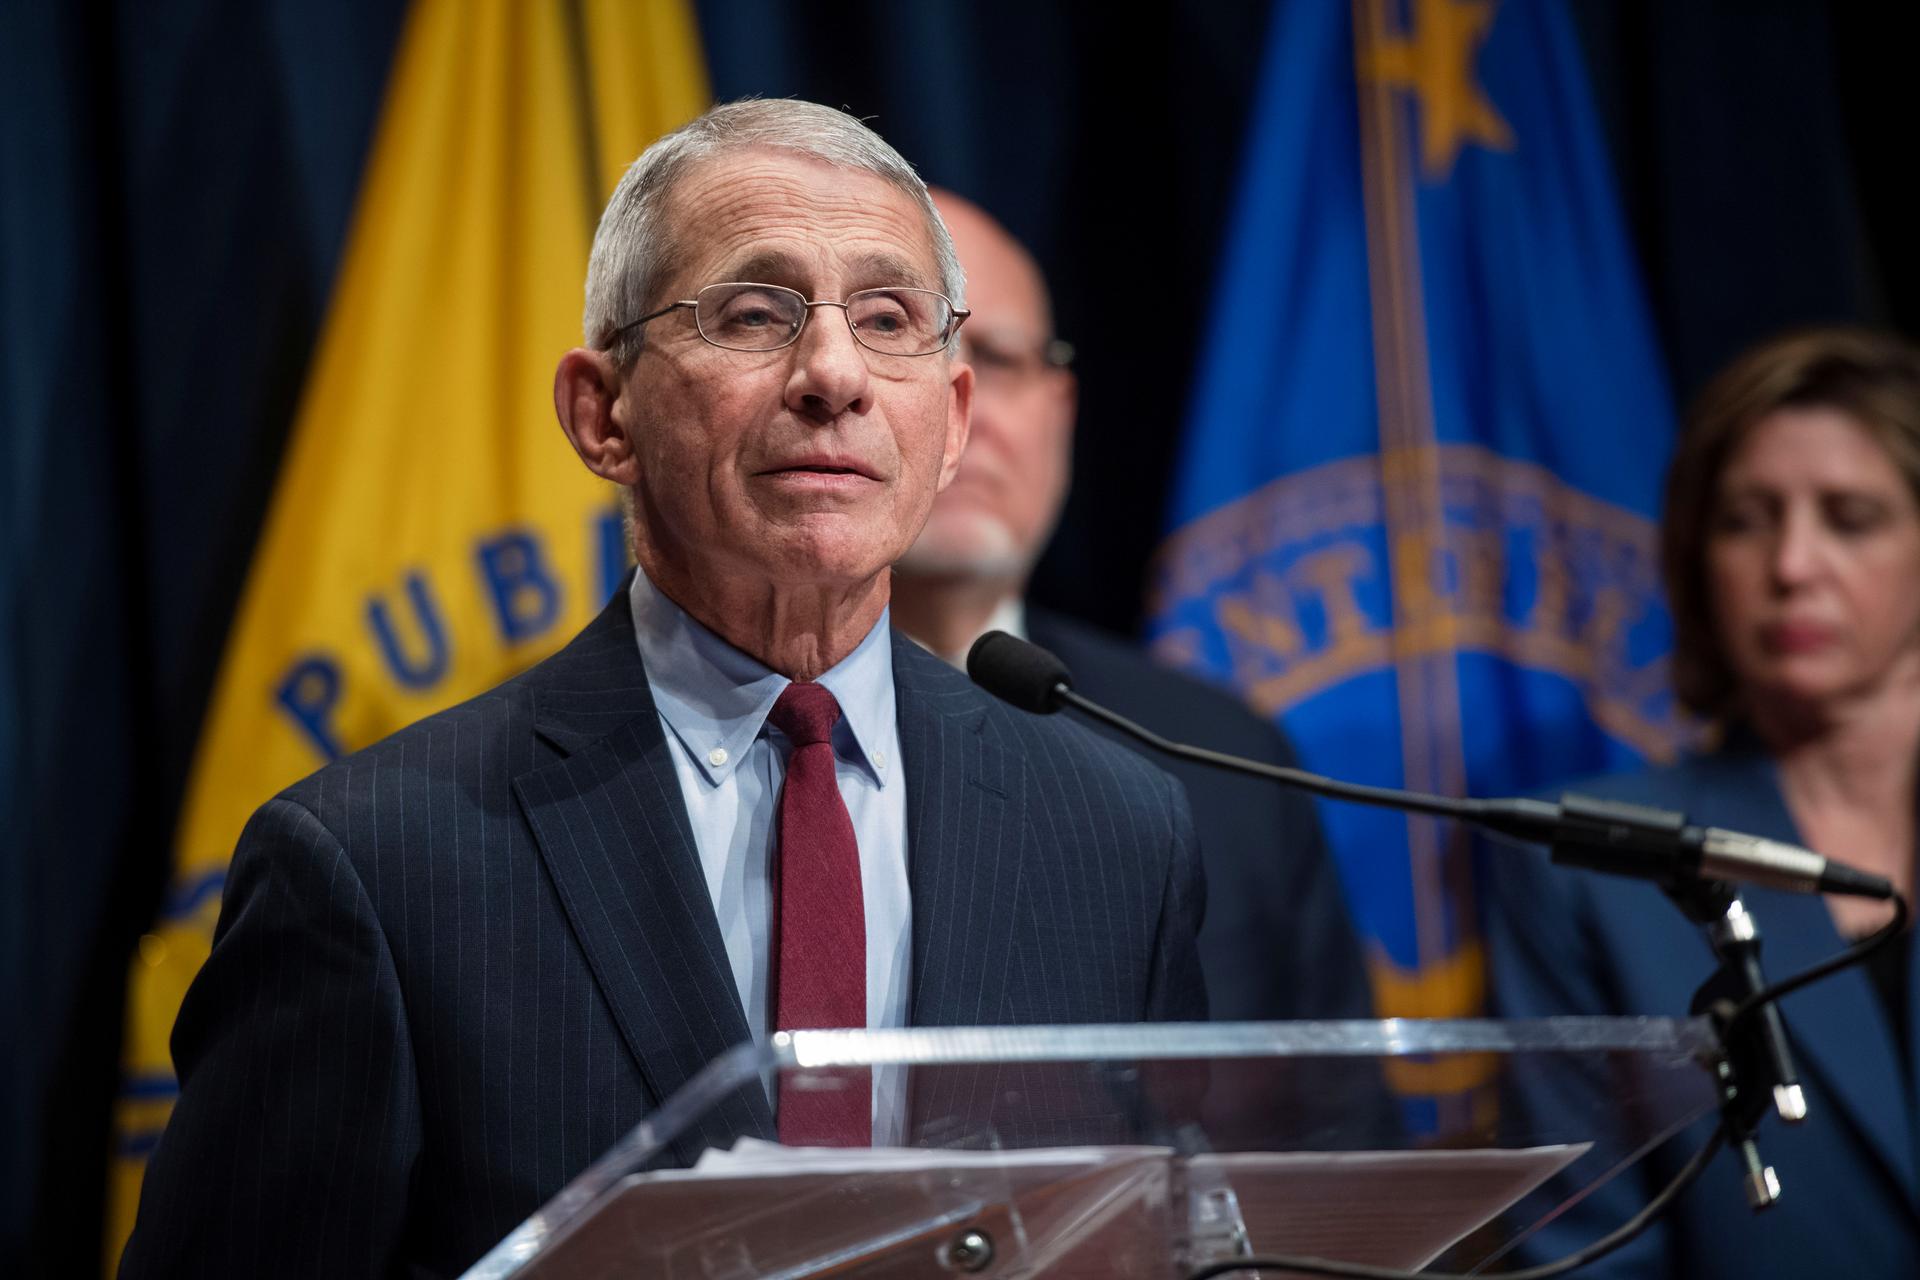 National Institute of Allergy and Infectious Diseases Director doctor Anthony Fauci speaks about the public health response to the outbreak of the coronavirus during a news conference at the Department of Health and Human Services in Washington, DC.